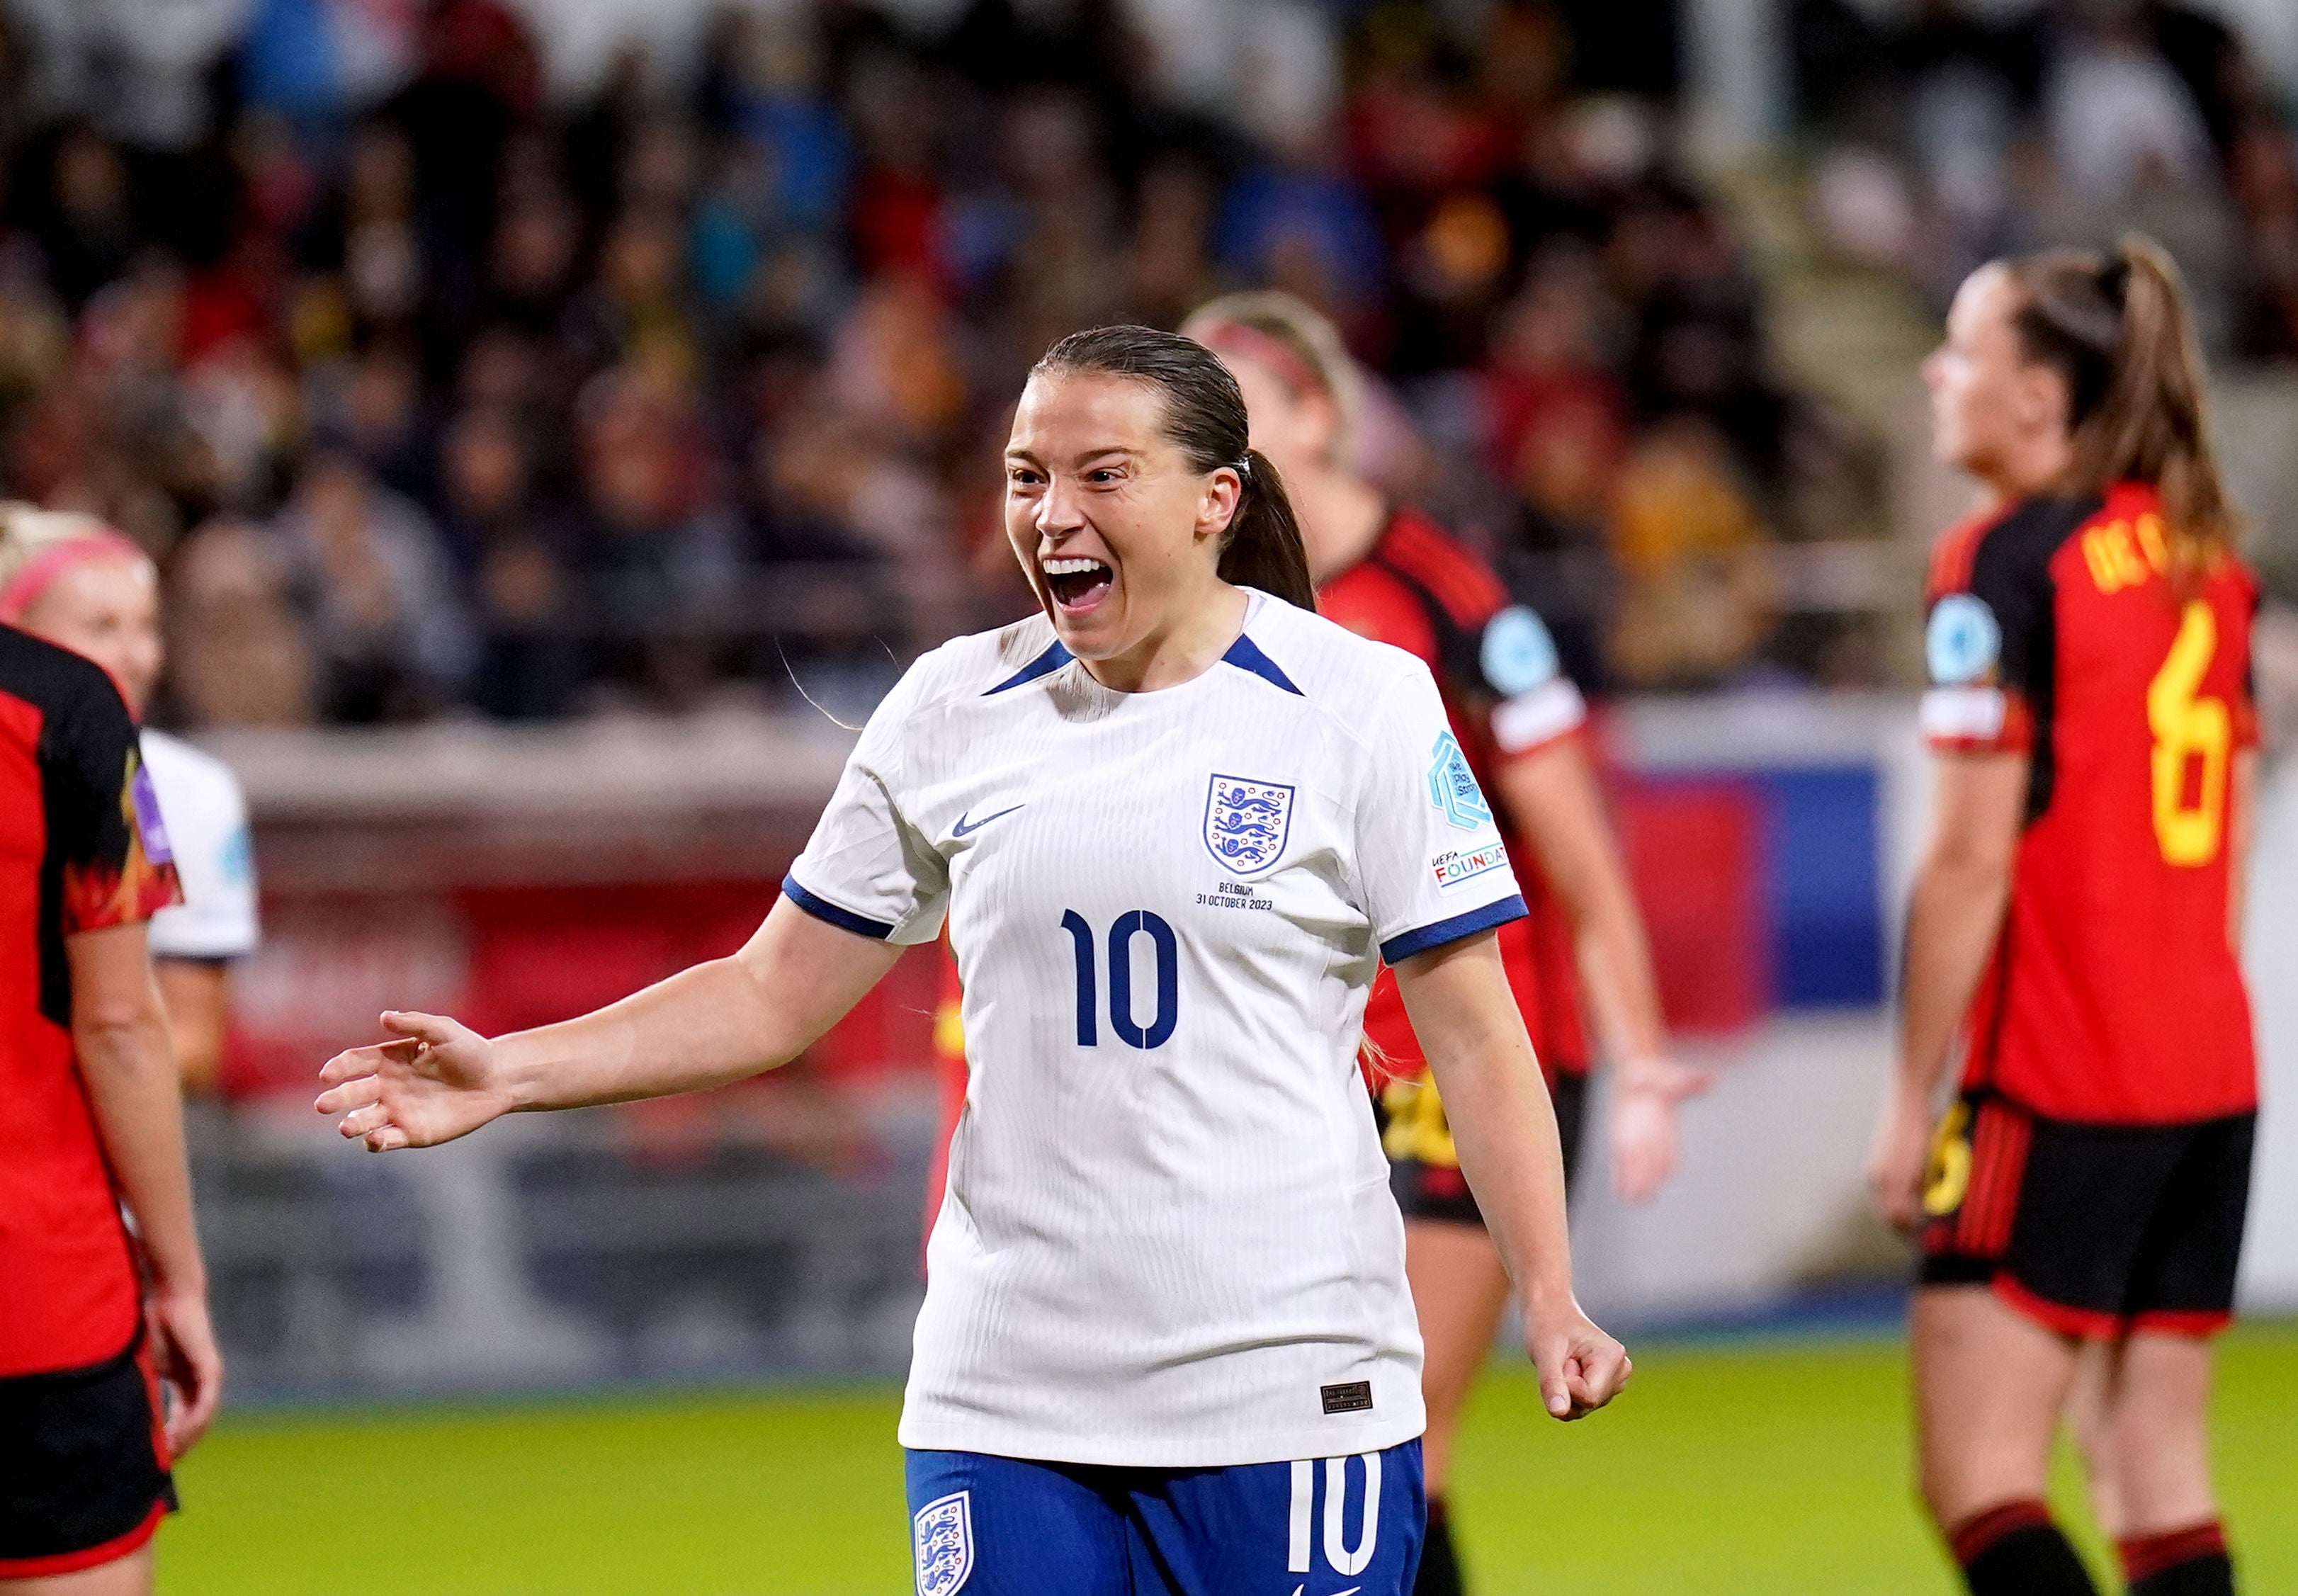 Fran Kirby sent England ahead on her first start this year but Tessa Wullaert’s late penalty gave Belgium the win